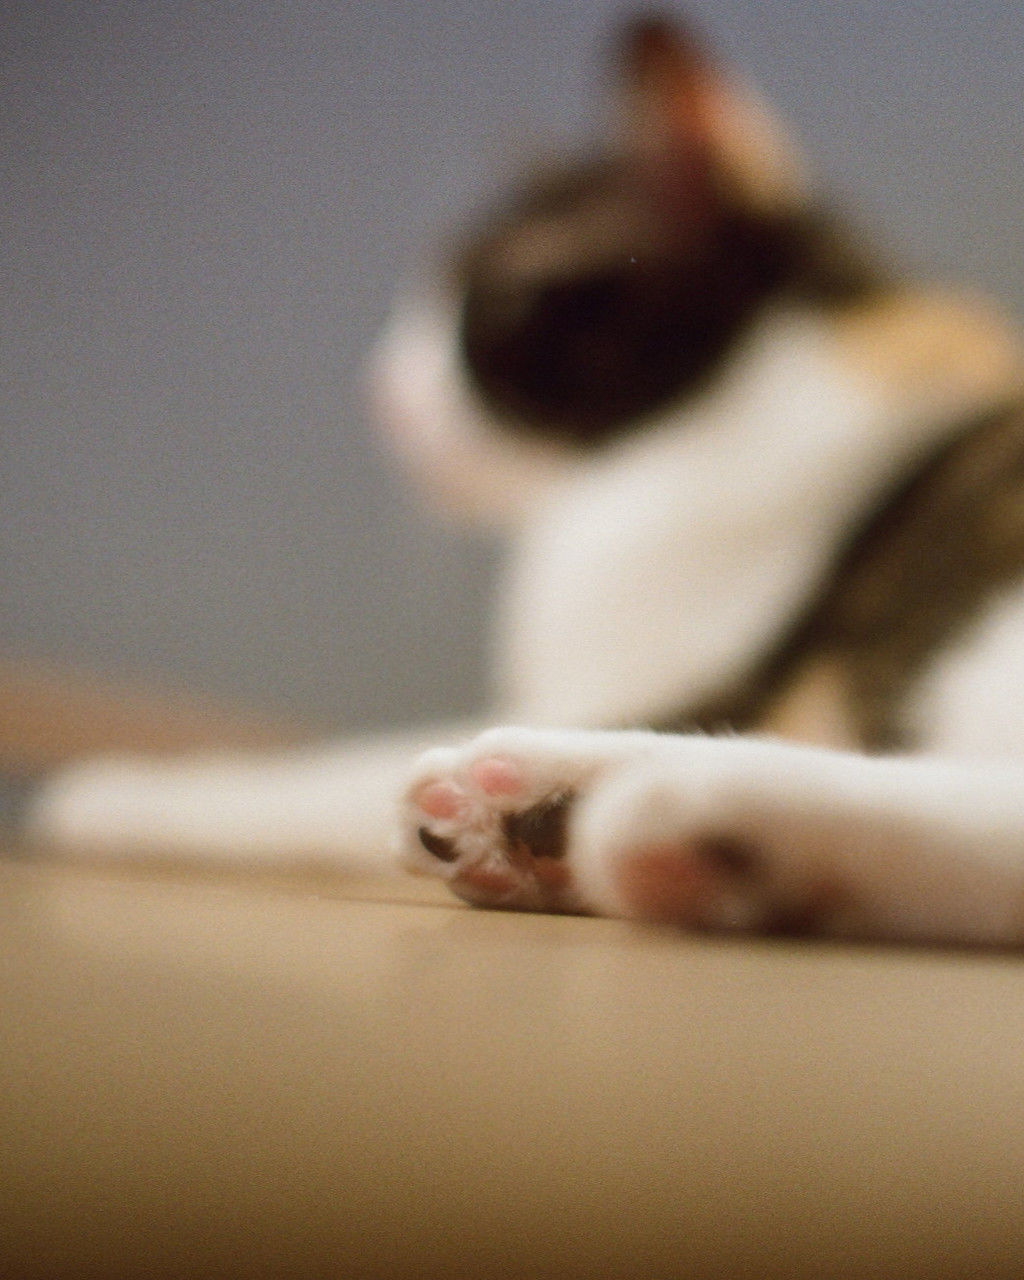 cat, skin, pet, mammal, animal themes, animal, indoors, domestic animals, one animal, hand, close-up, white, one person, limb, relaxation, nose, small to medium-sized cats, lying down, dog, canine, selective focus, human leg, domestic cat